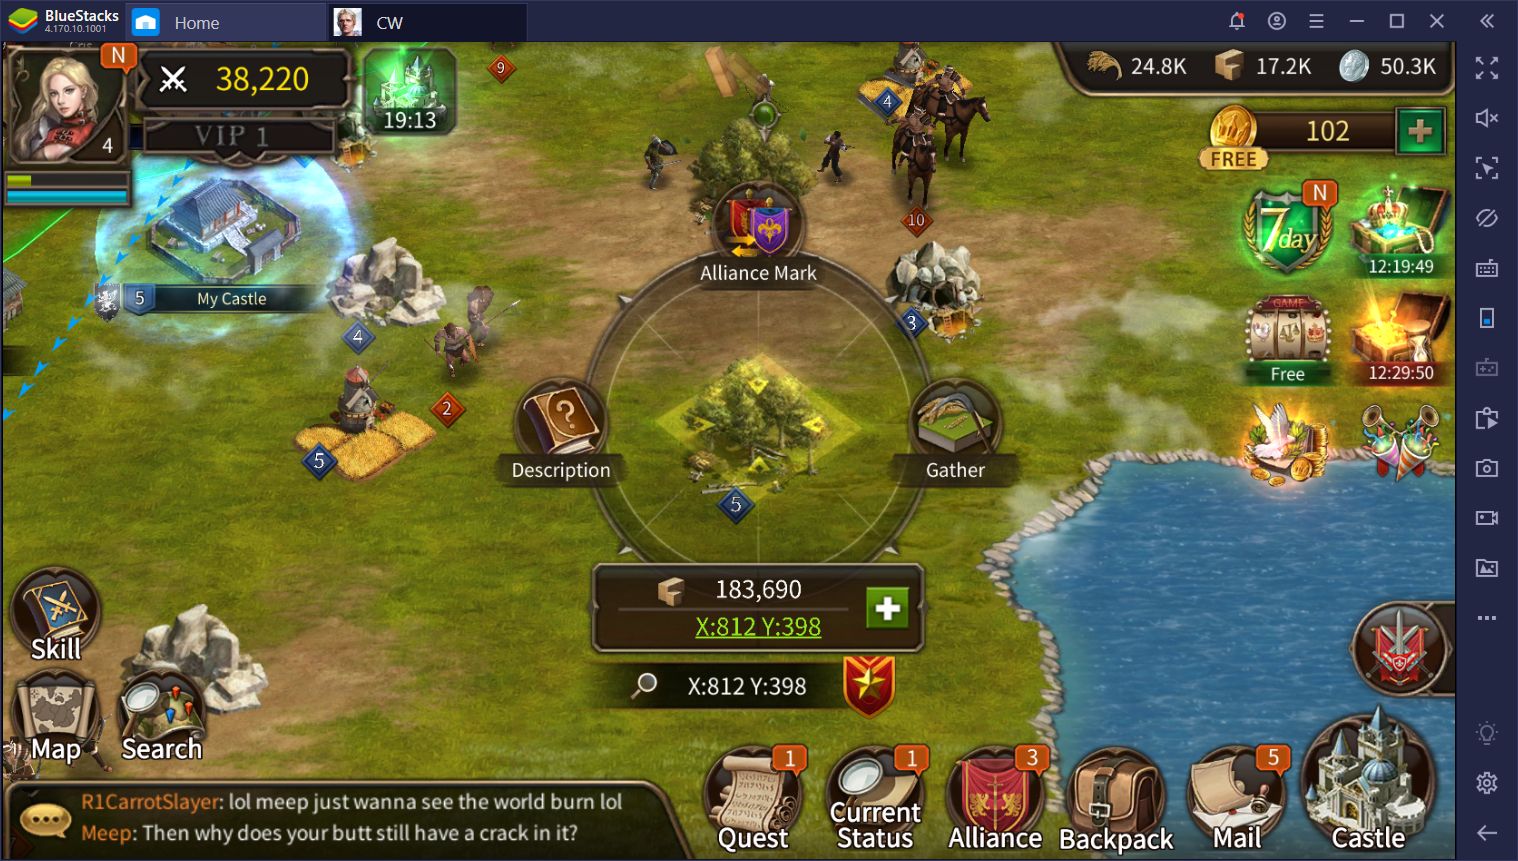 Reign of Empires: Conquest Age Tips, Cheats, Vidoes and Strategies